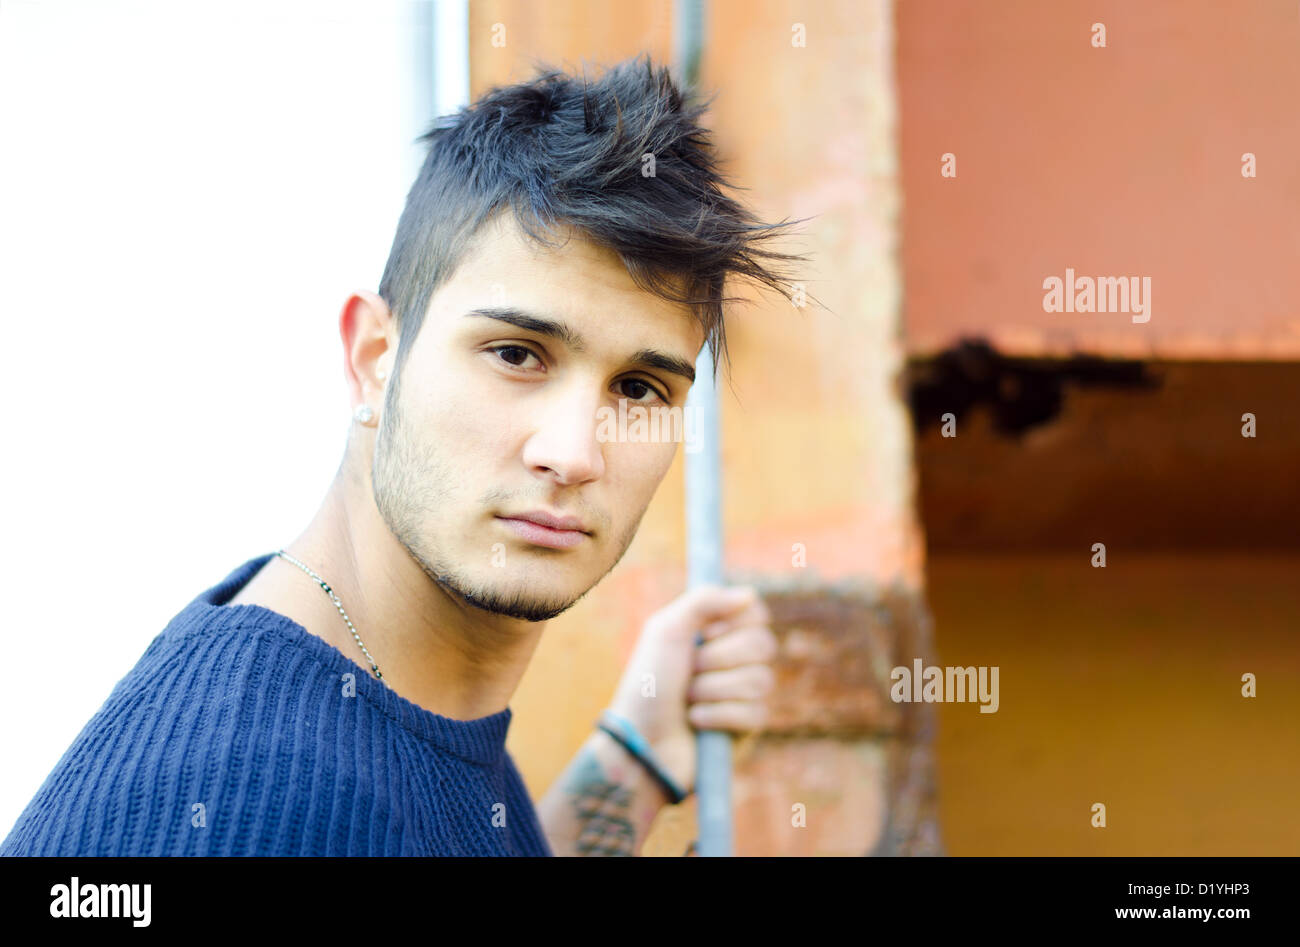 Handsome young man in urban or industrial setting with rusty metal structure Stock Photo